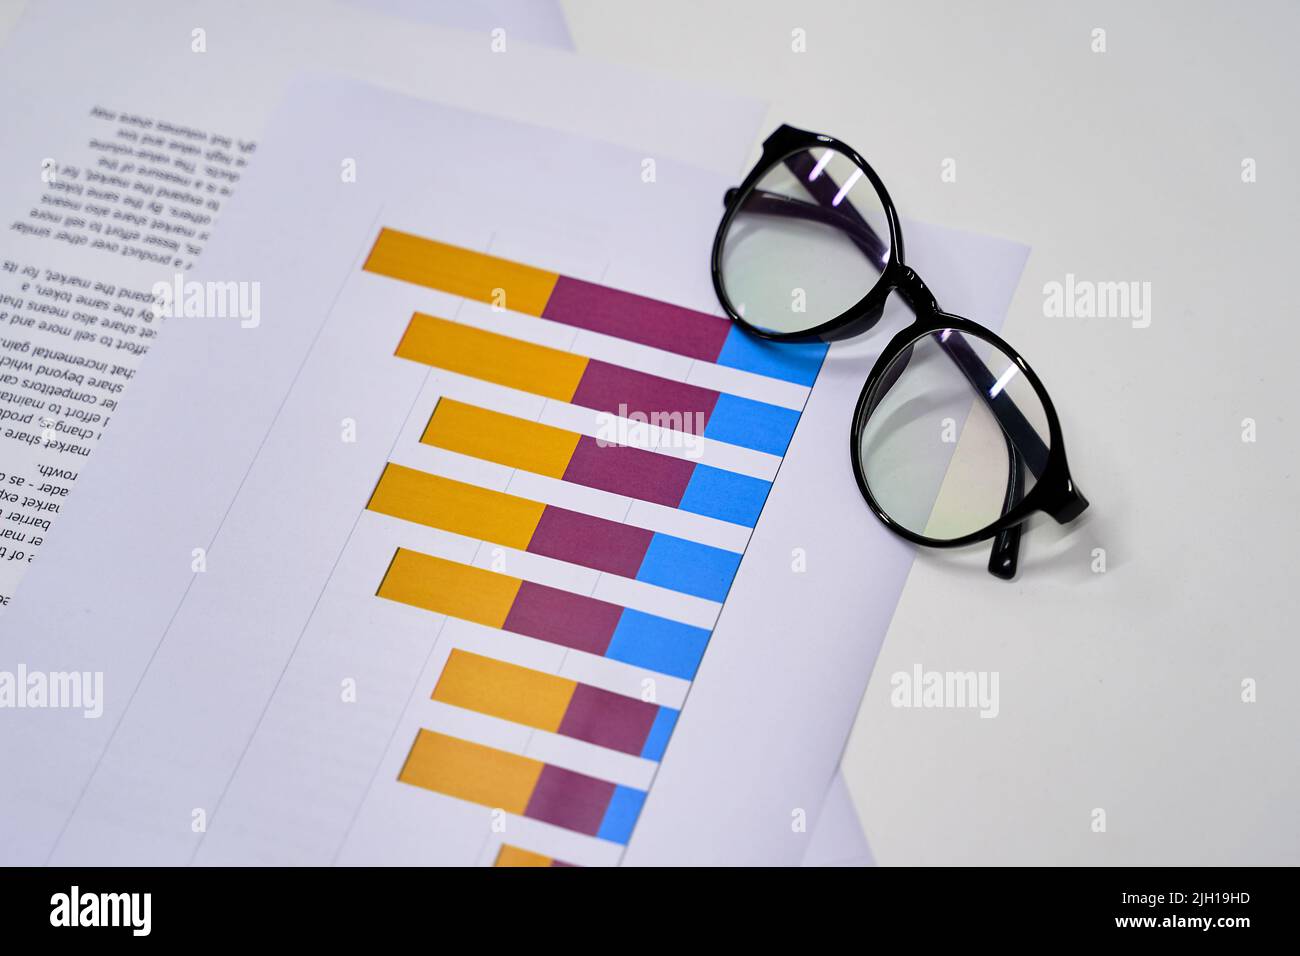 Stylish eyeglasses and colorful chart on the white work table. Business concept. Stock Photo